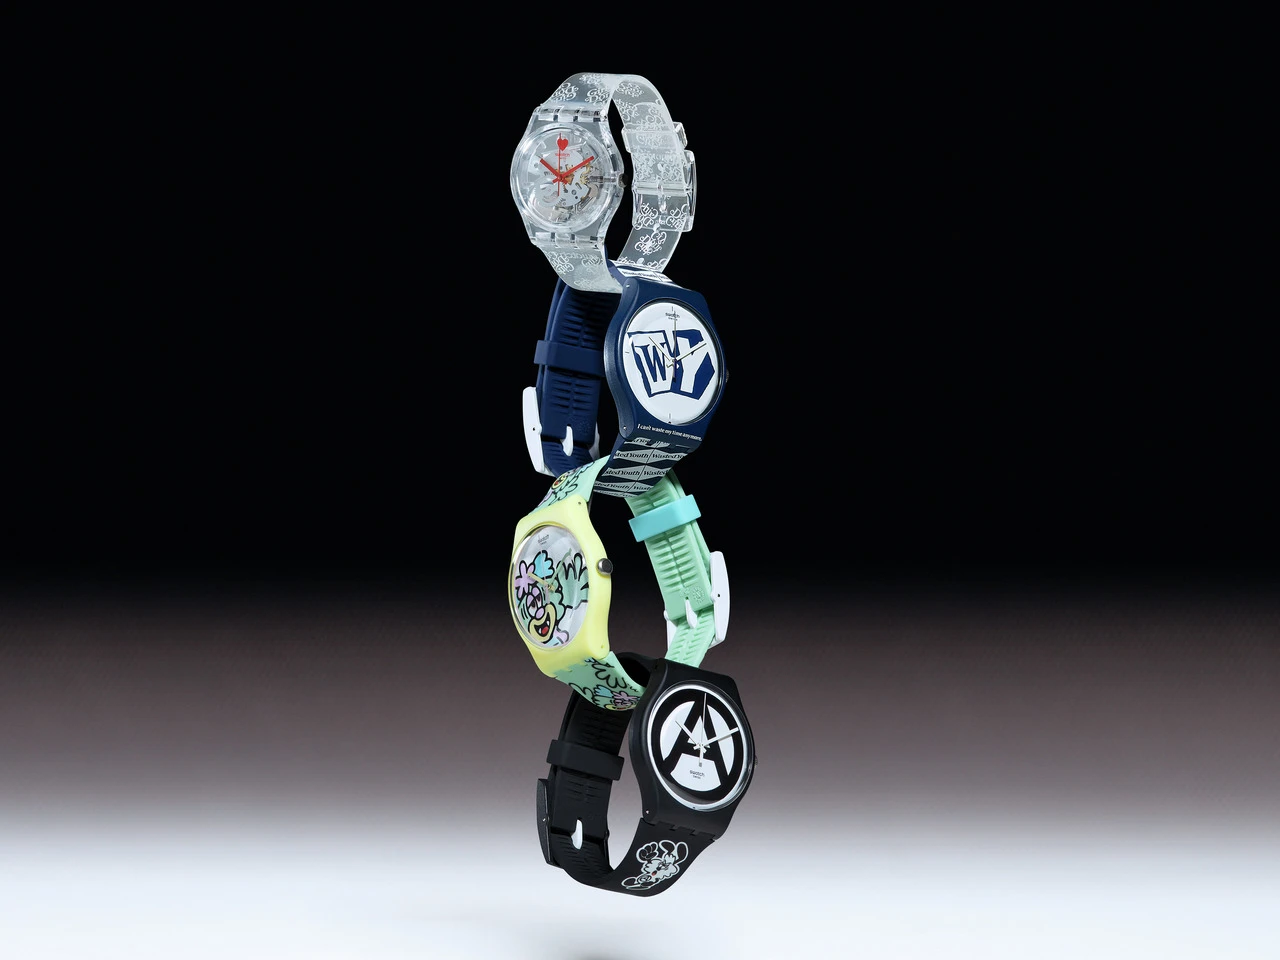 A stack of six colorful and uniquely designed wristwatches with various patterns and logos, set against a dark gradient background.